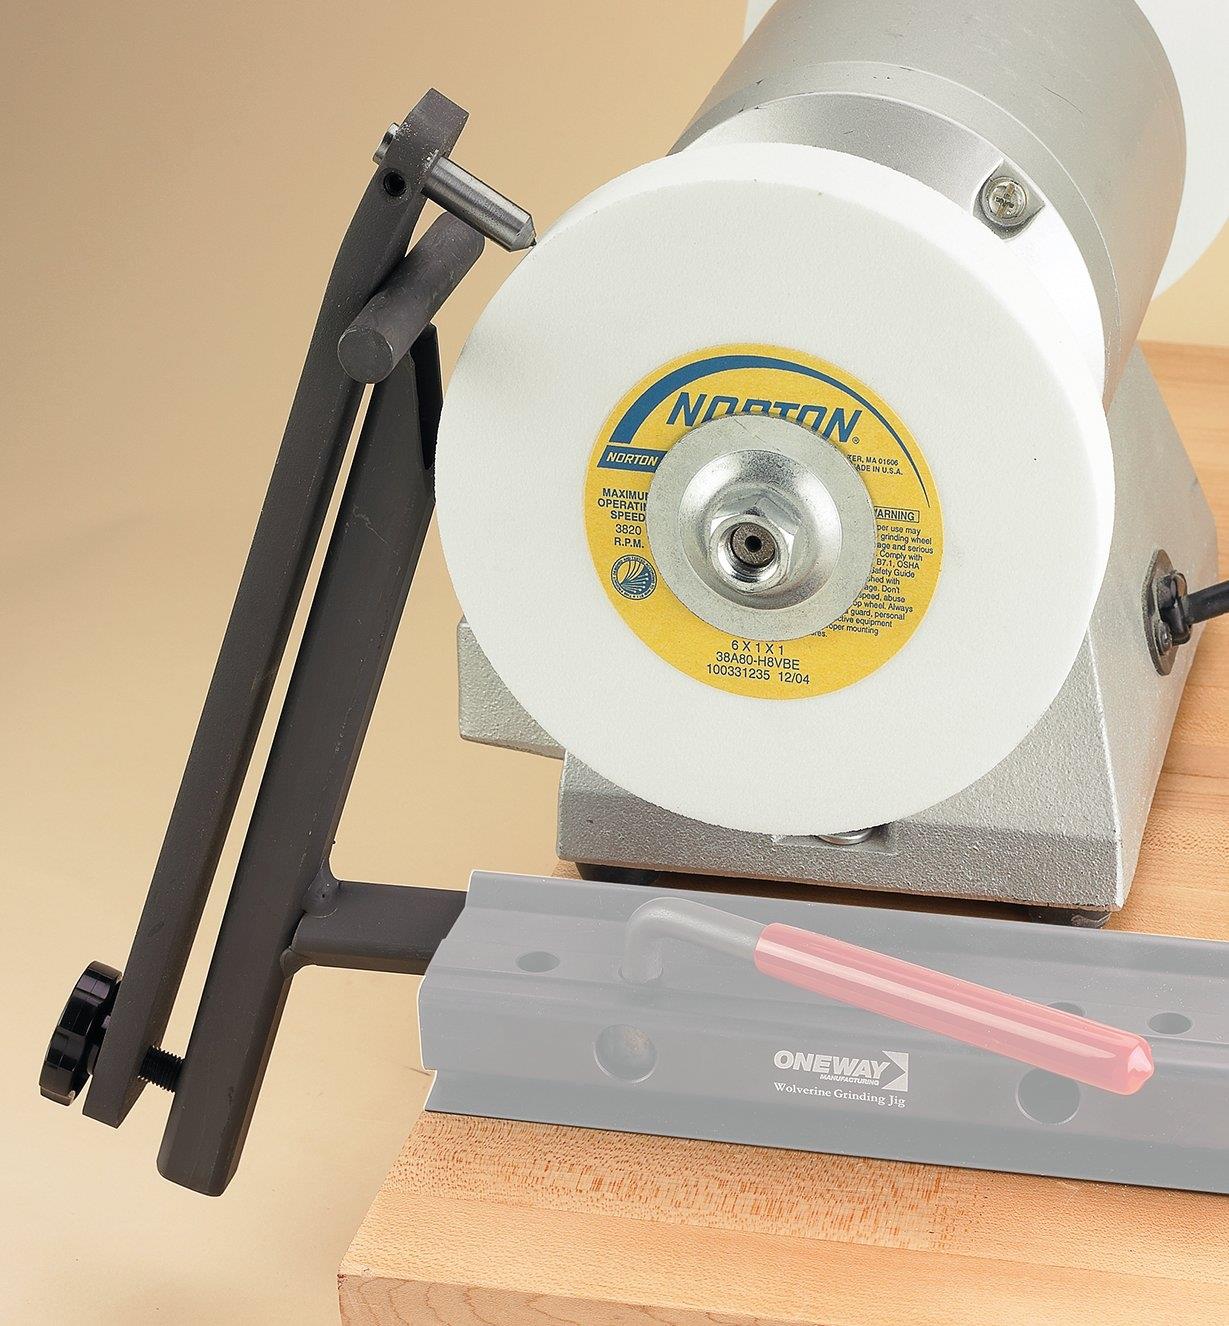 Using the Wolverine Wheel Dressing Jig on a grinding wheel